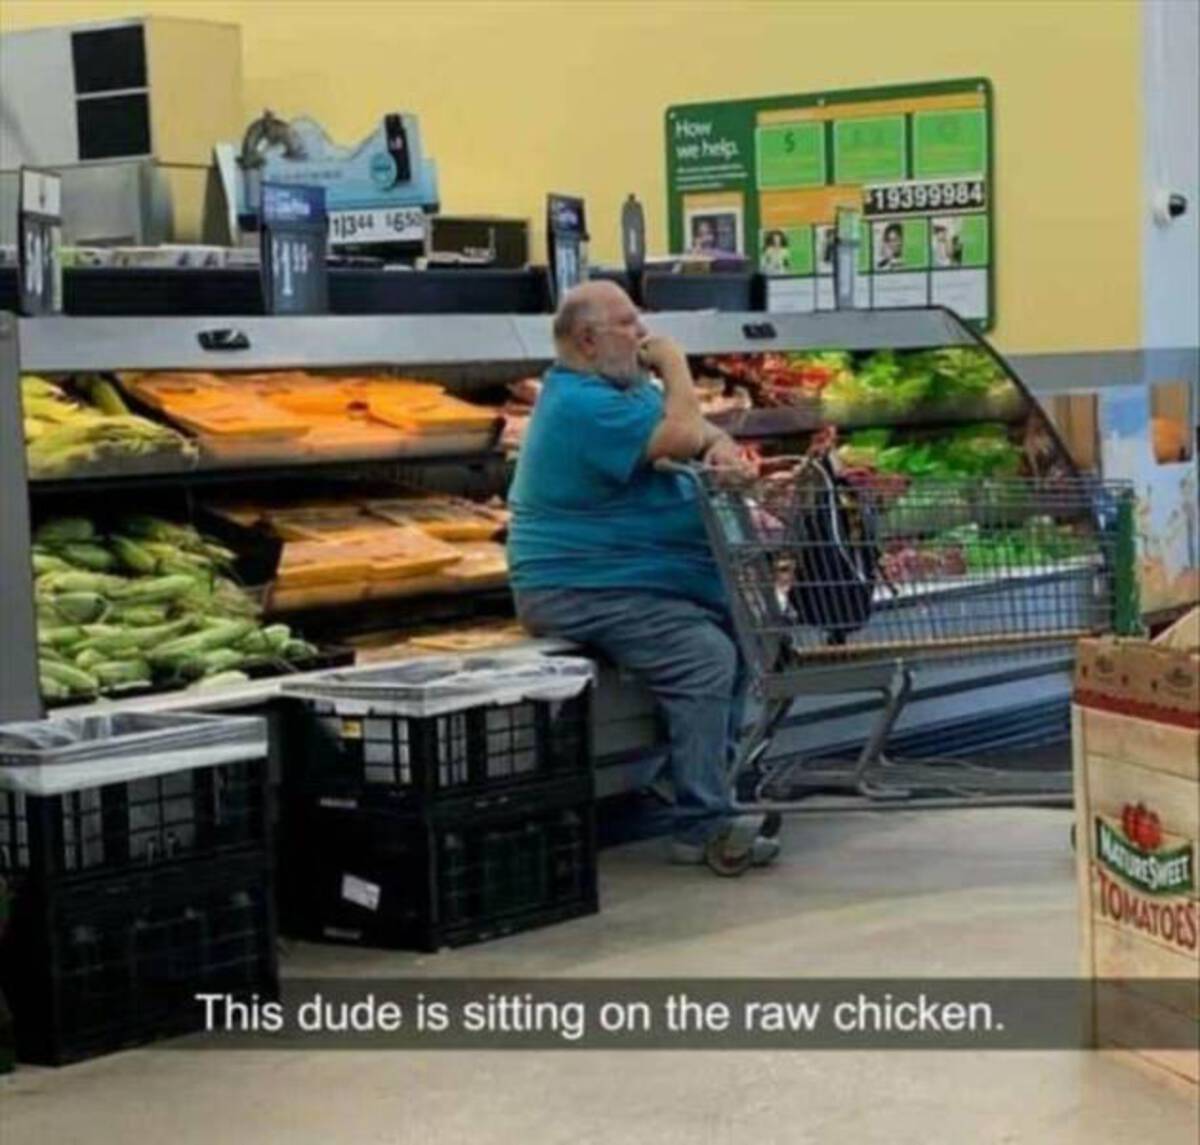 supermarket - 11344 1650 How we help 19399984 This dude is sitting on the raw chicken. Tomatoes